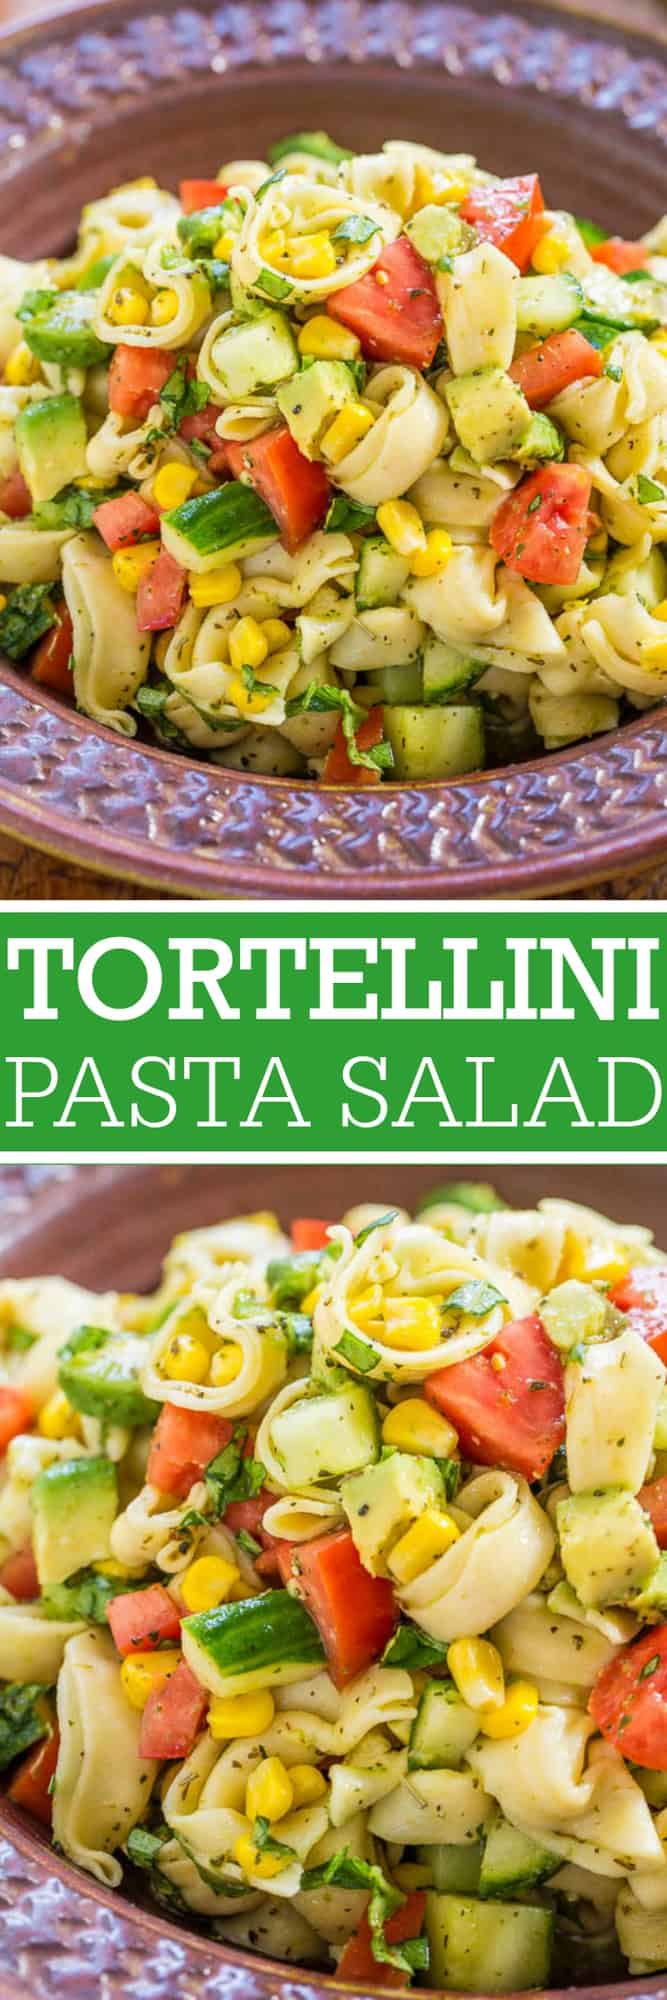 Garden Fresh Tortellini Pasta Salad - Juicy tomatoes, cucumbers and corn with creamy avocado, basil and parmesan tossed in lemon vinaigrette with cheese tortellini!! Healthy, easy, ready in 15 minutes!